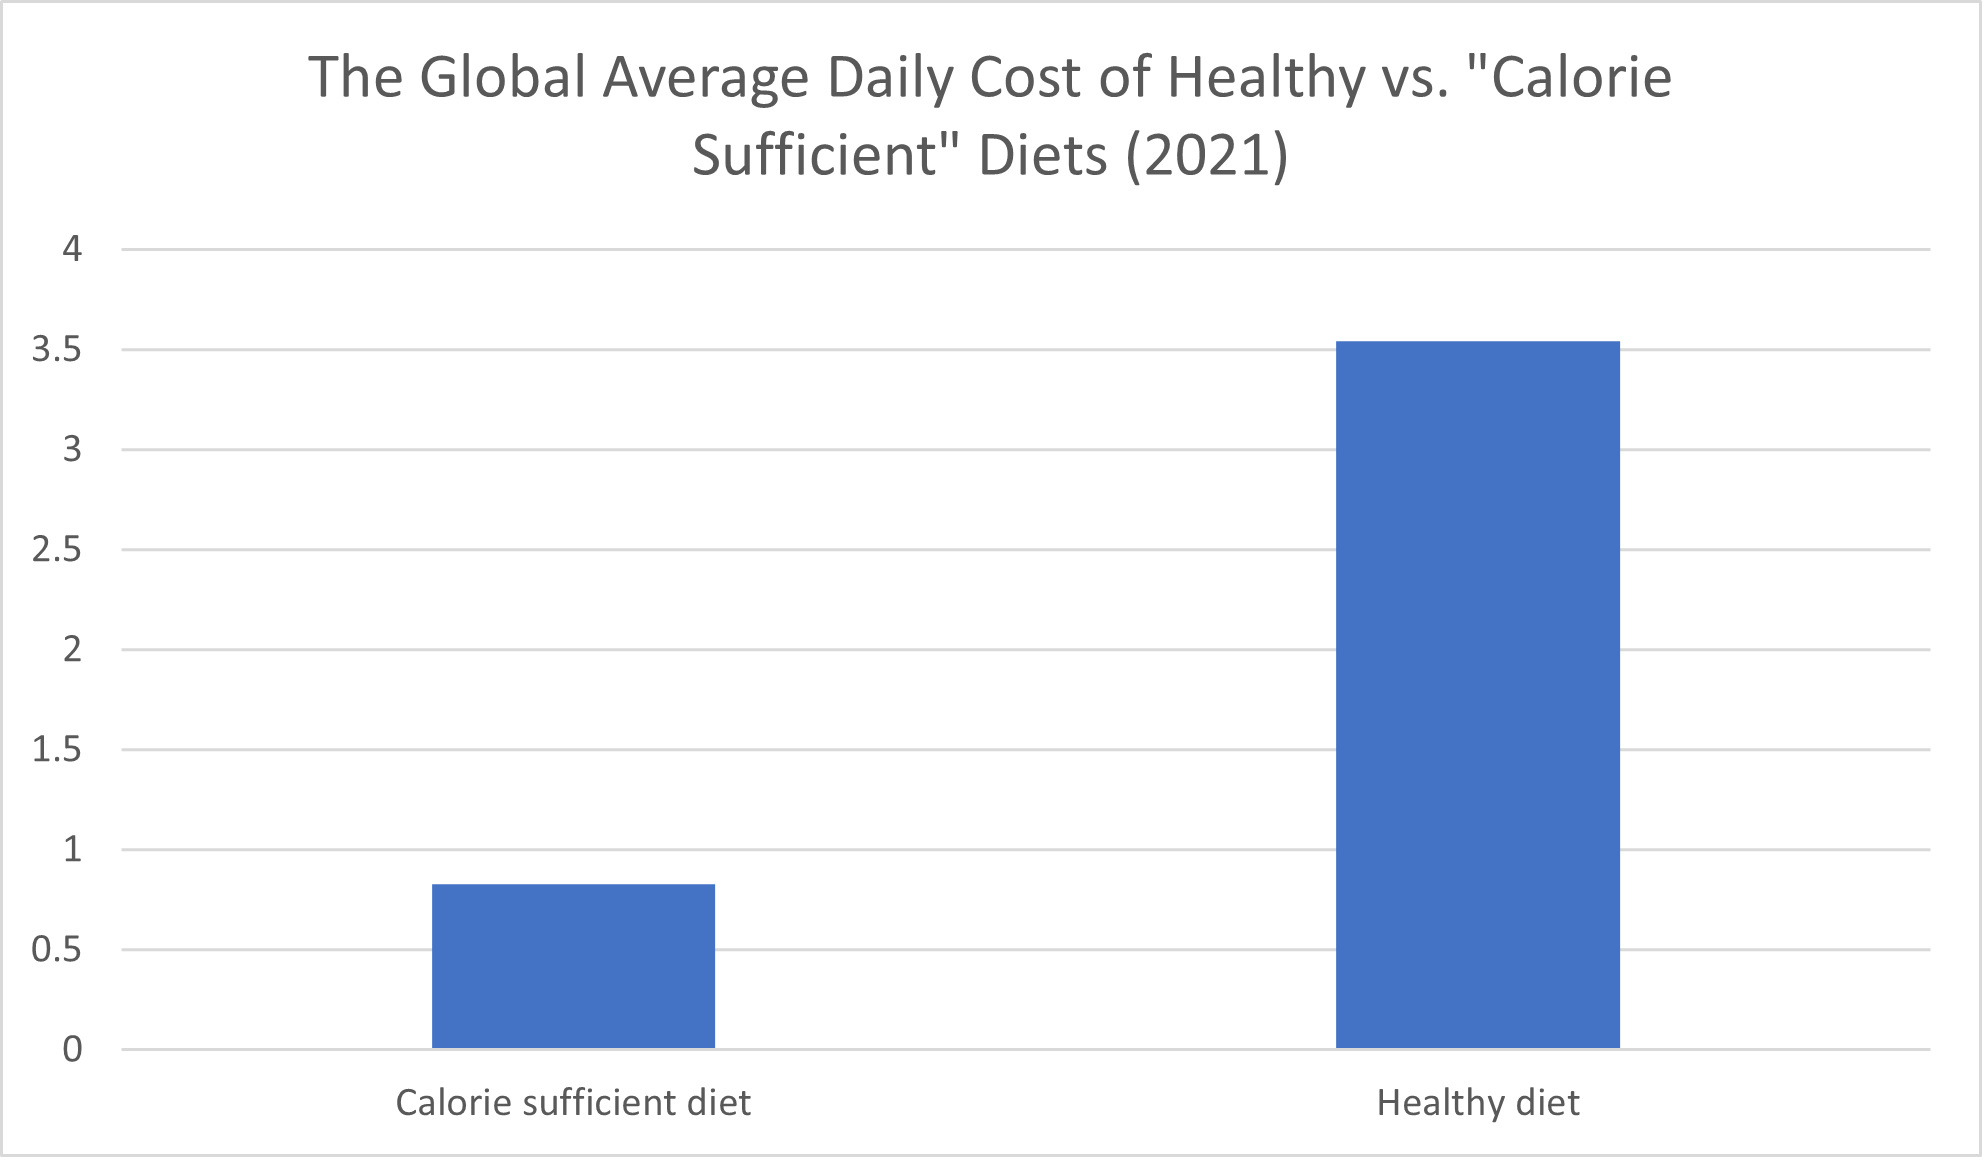 The Global Average Daily Cost of Healthy vs. "Calorie Sufficient" Diets (2021) 